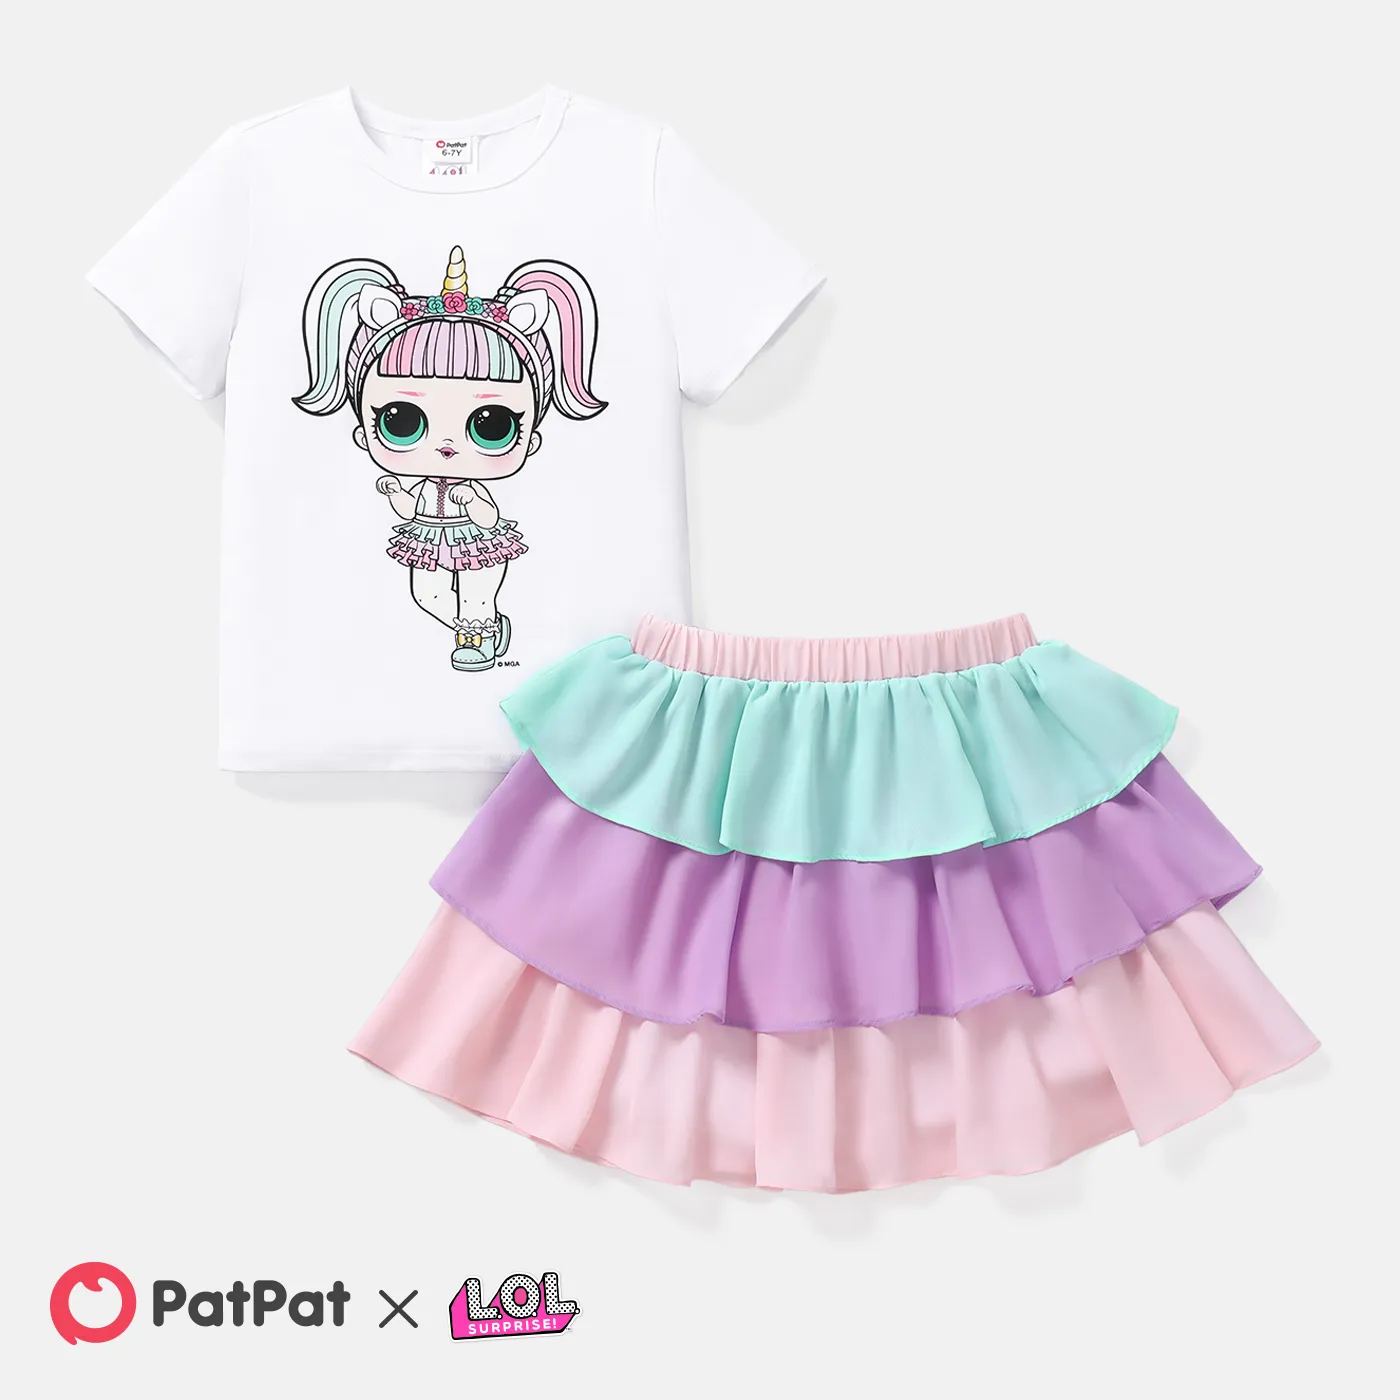 

L.O.L. SURPRISE! 2pcs Kid Girl Character Print Short-sleeve Cotton Tee and Colorblock Layered Skirt Set